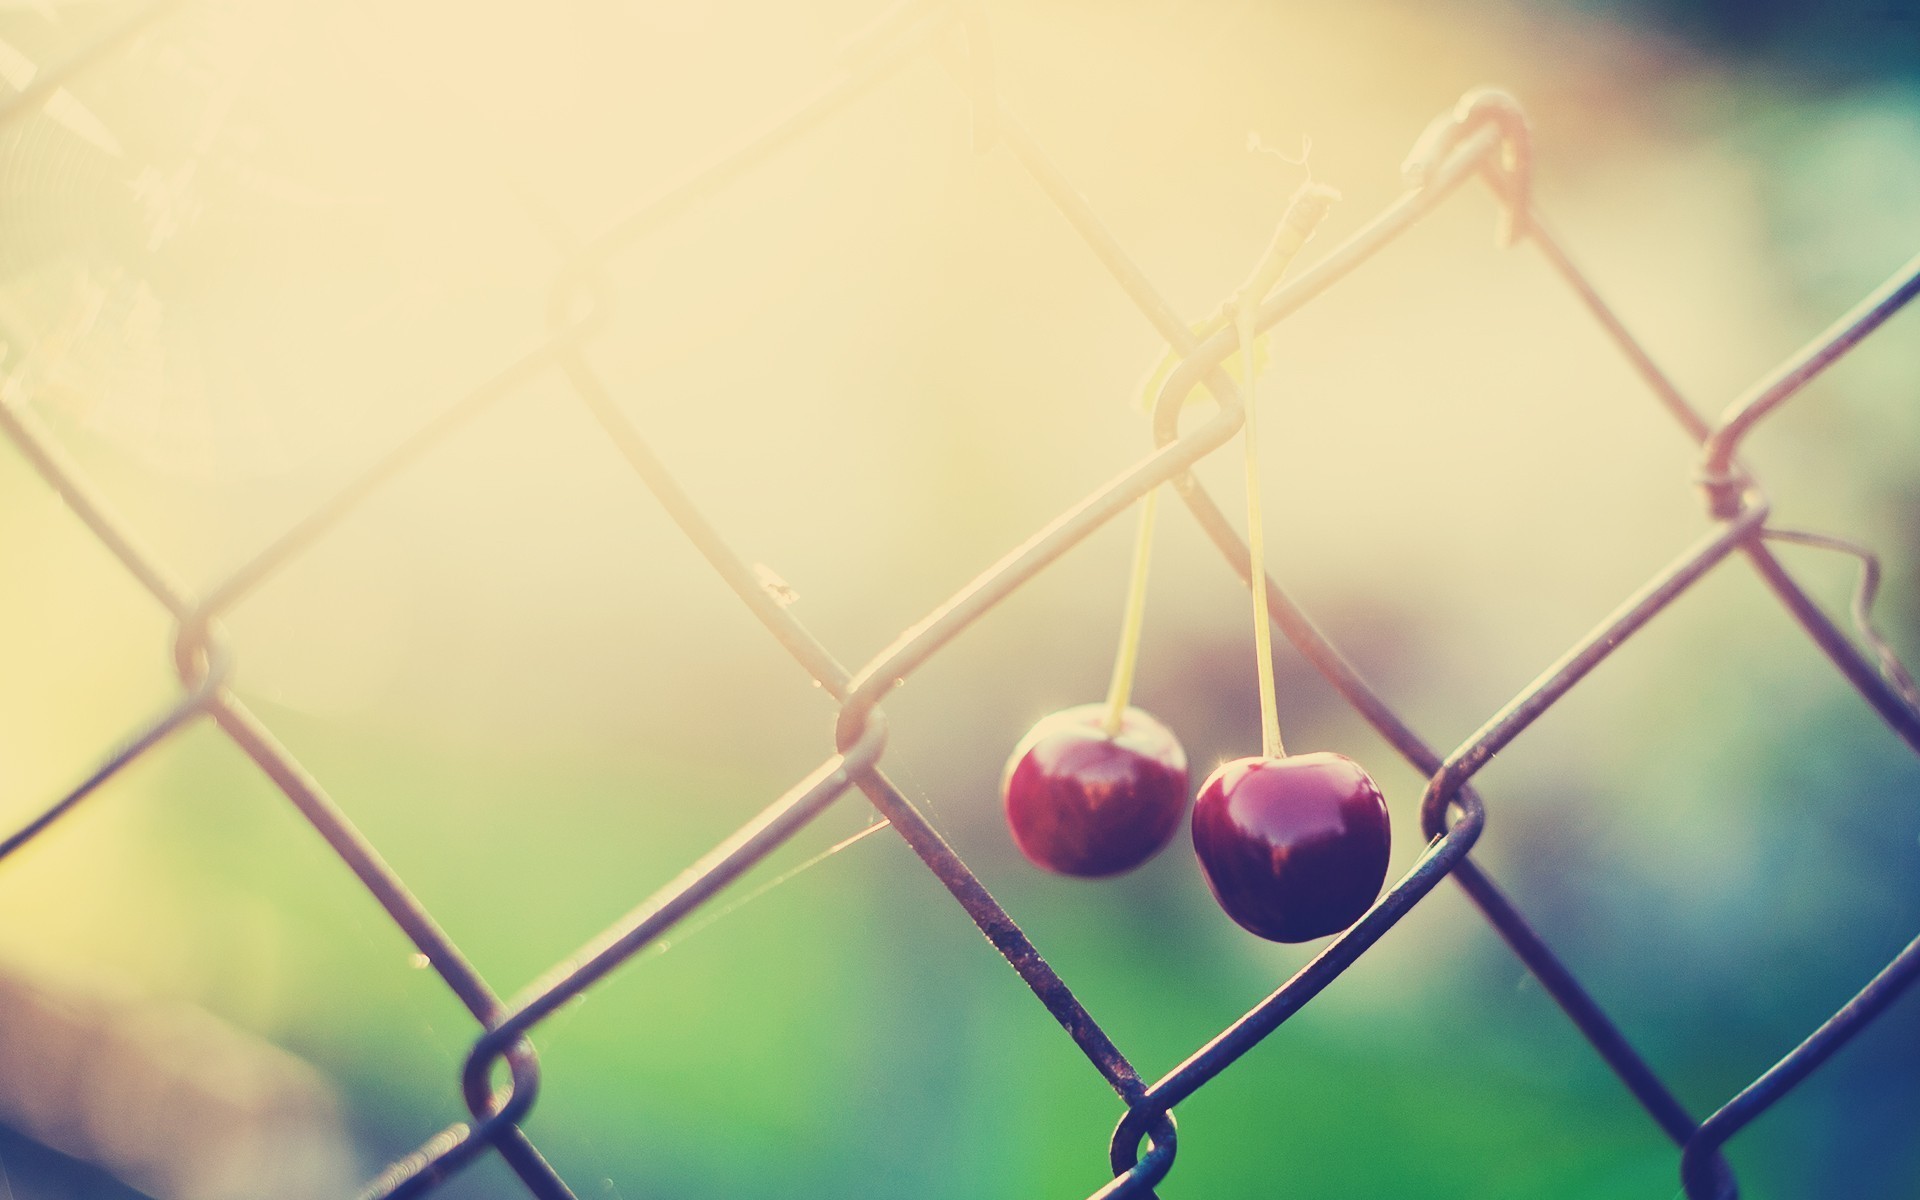 fences, Fruits, Cherries, Sunlight, Chain, Link, Fence Wallpaper